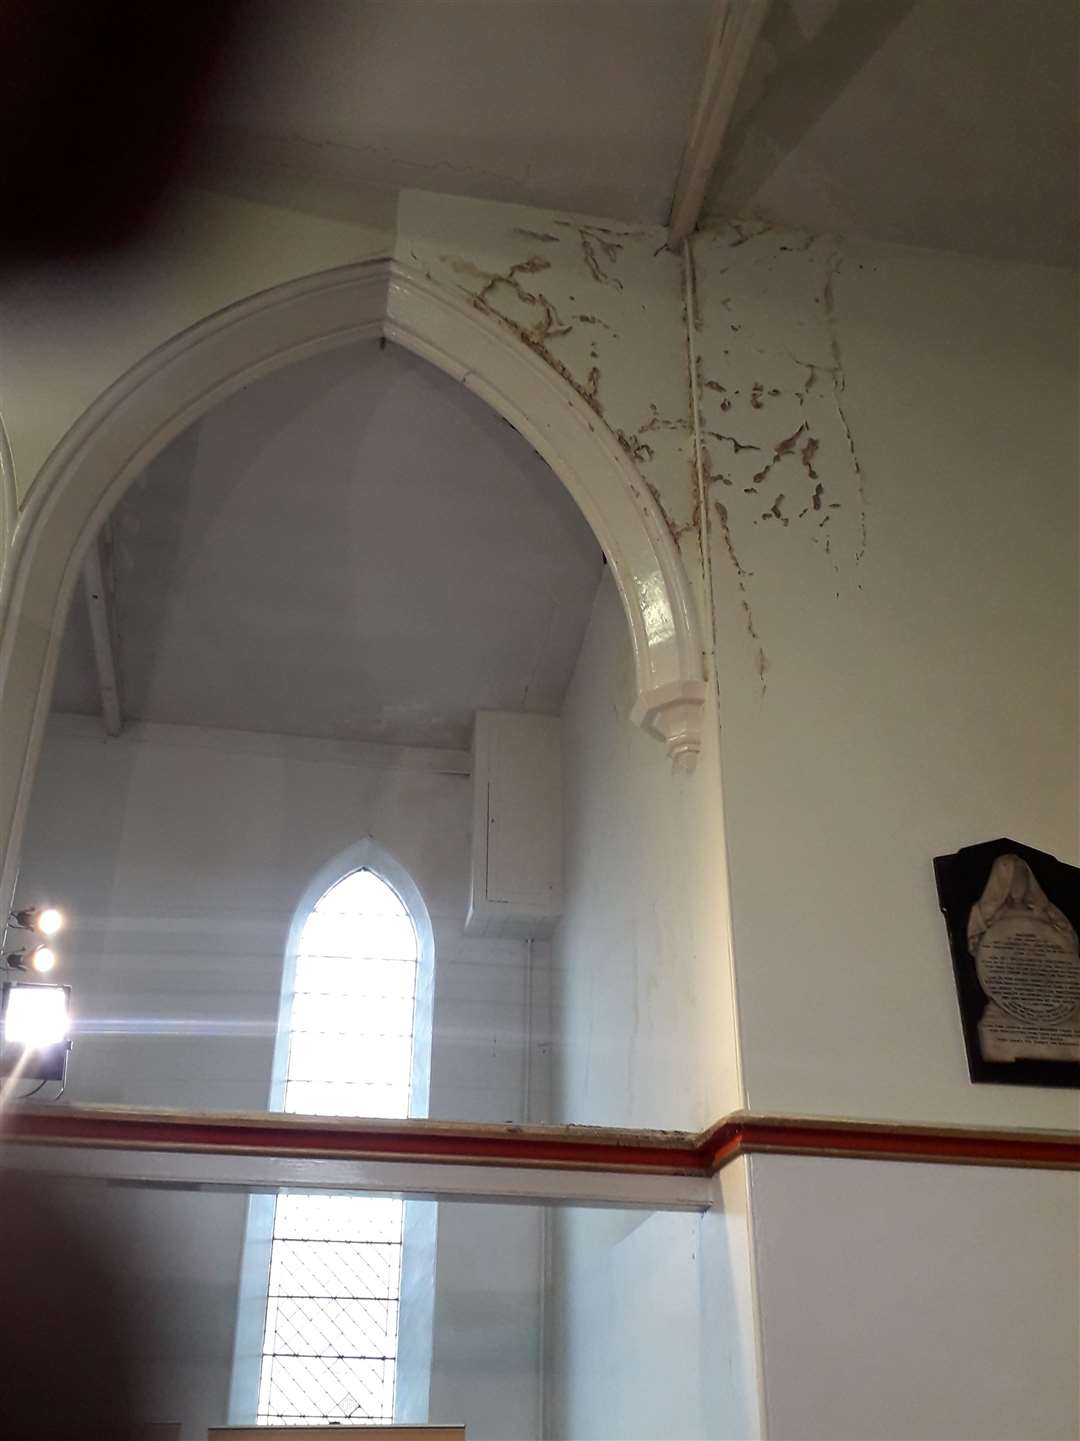 Plaster is falling off the walls in Holy Trinity Church in Trinity Road, Sheerness